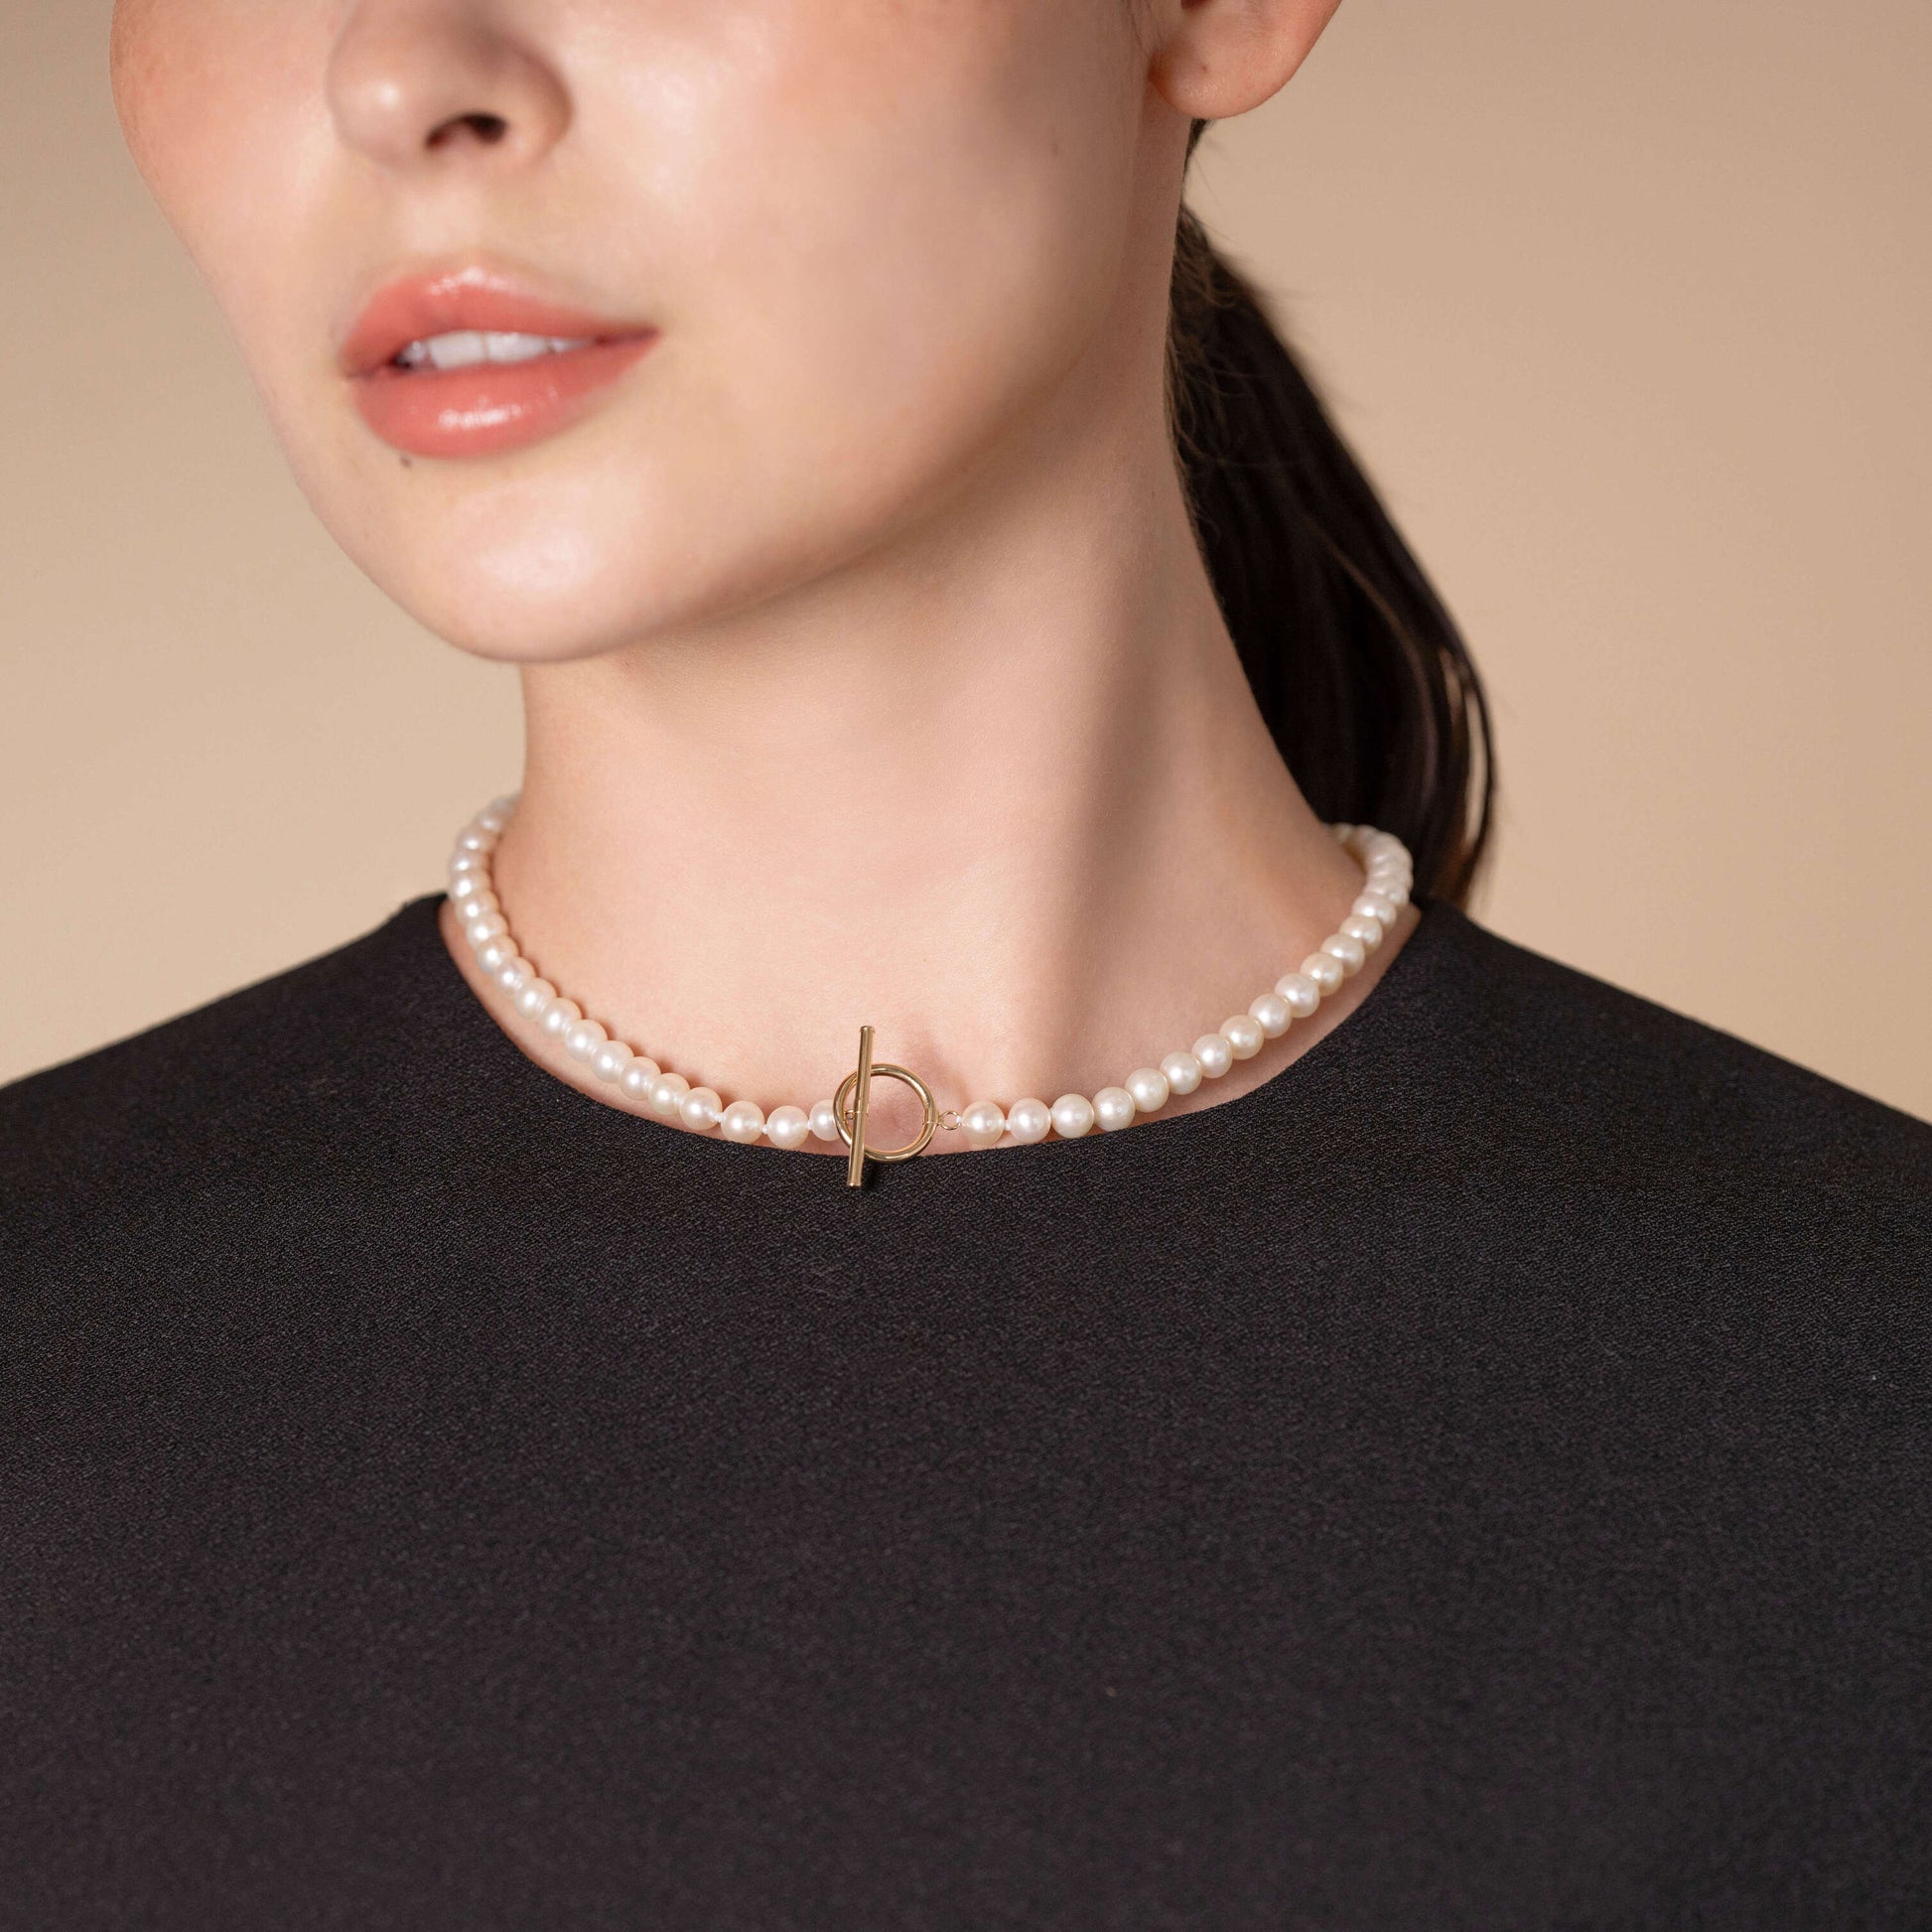 Elevate your look effortlessly - a woman donning a black top and a captivating Mantel Pearl Necklace Short.